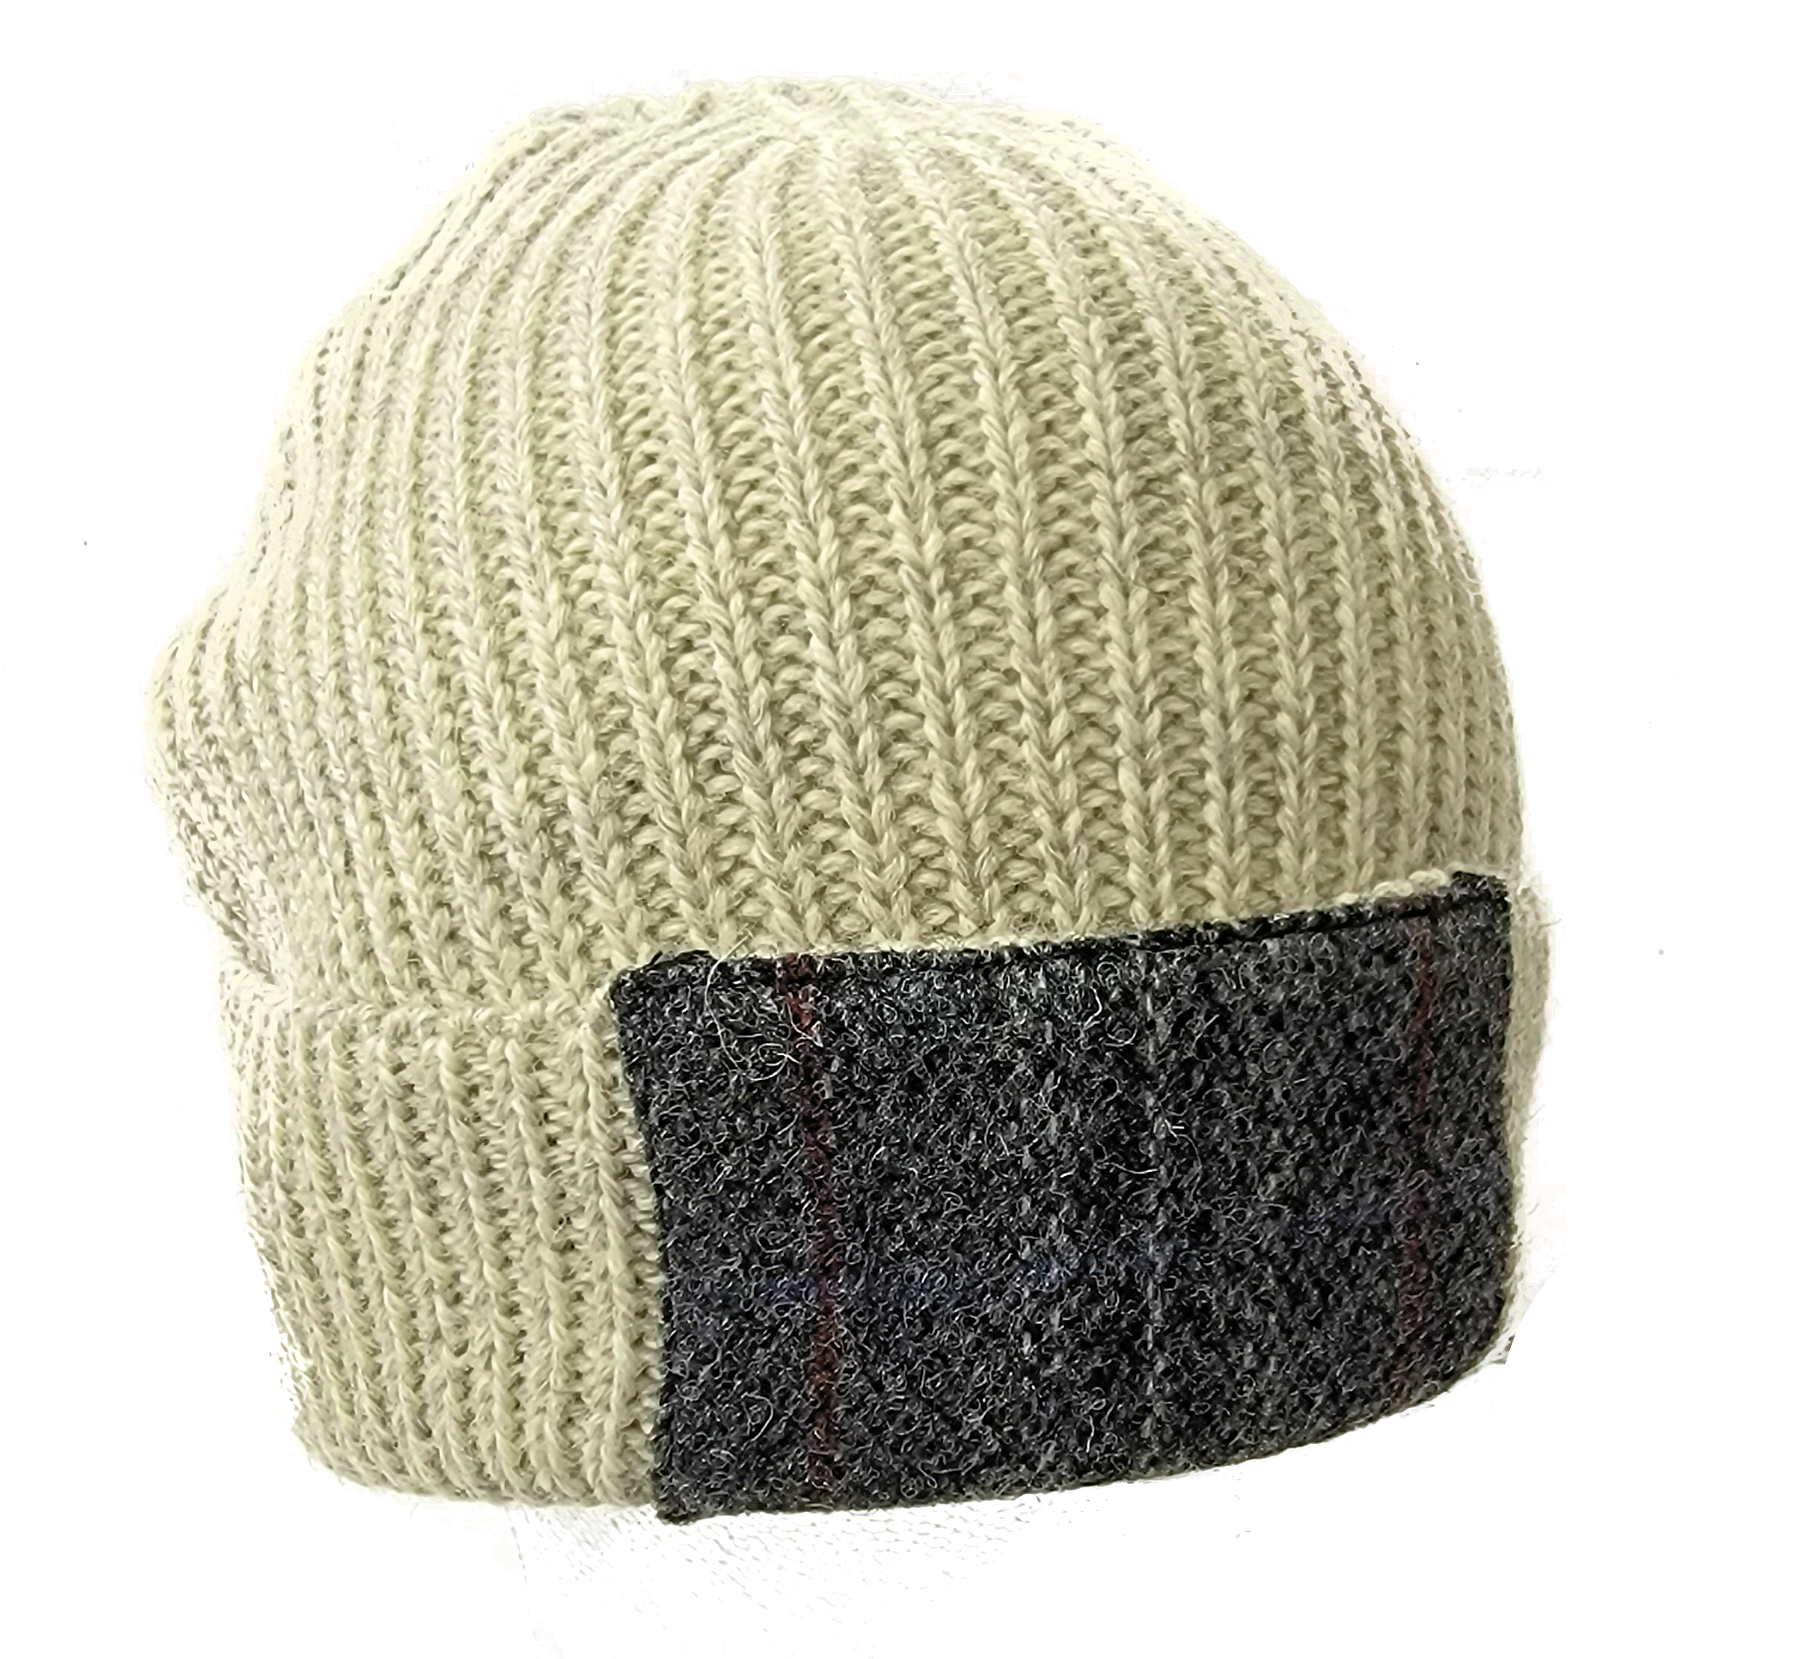 Woolly Pully Beanie Hats with Patch - TW Kempton Kilmory Wool Cap